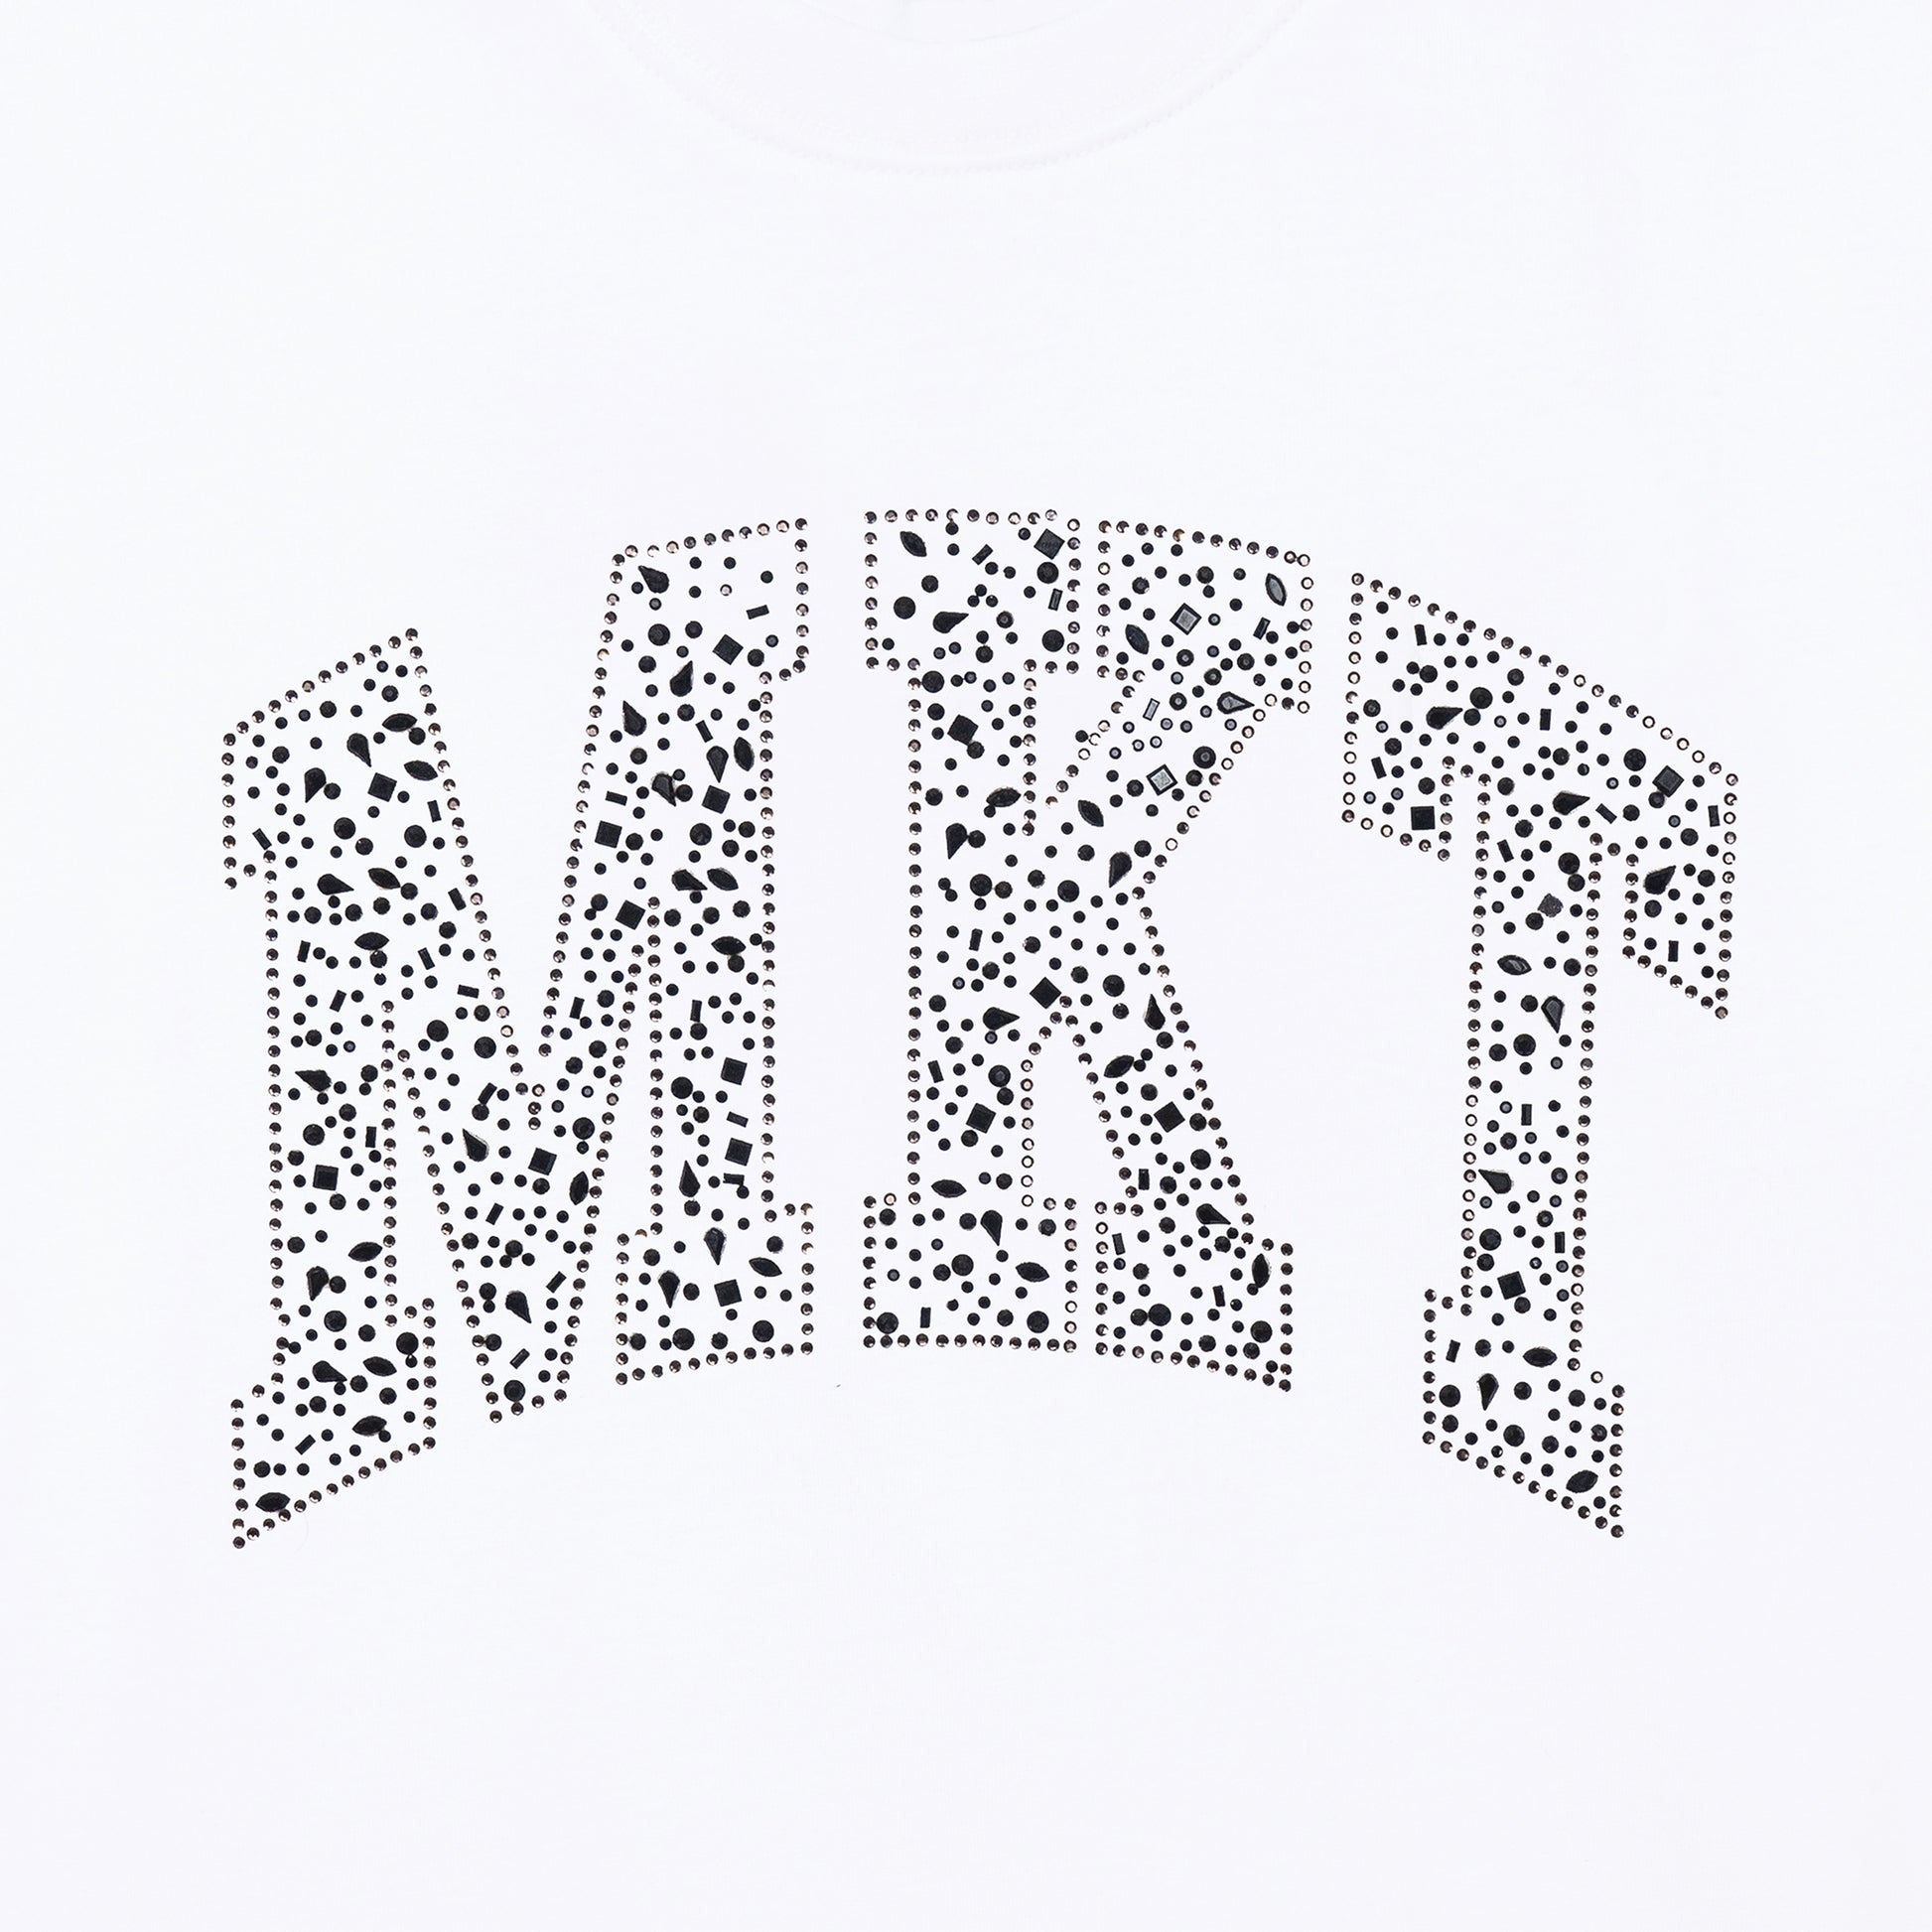 MARKET clothing brand MKT RHINESTONE ARC T-SHIRT. Find more graphic tees, hats, hoodies and more at MarketStudios.com. Formally Chinatown Market.